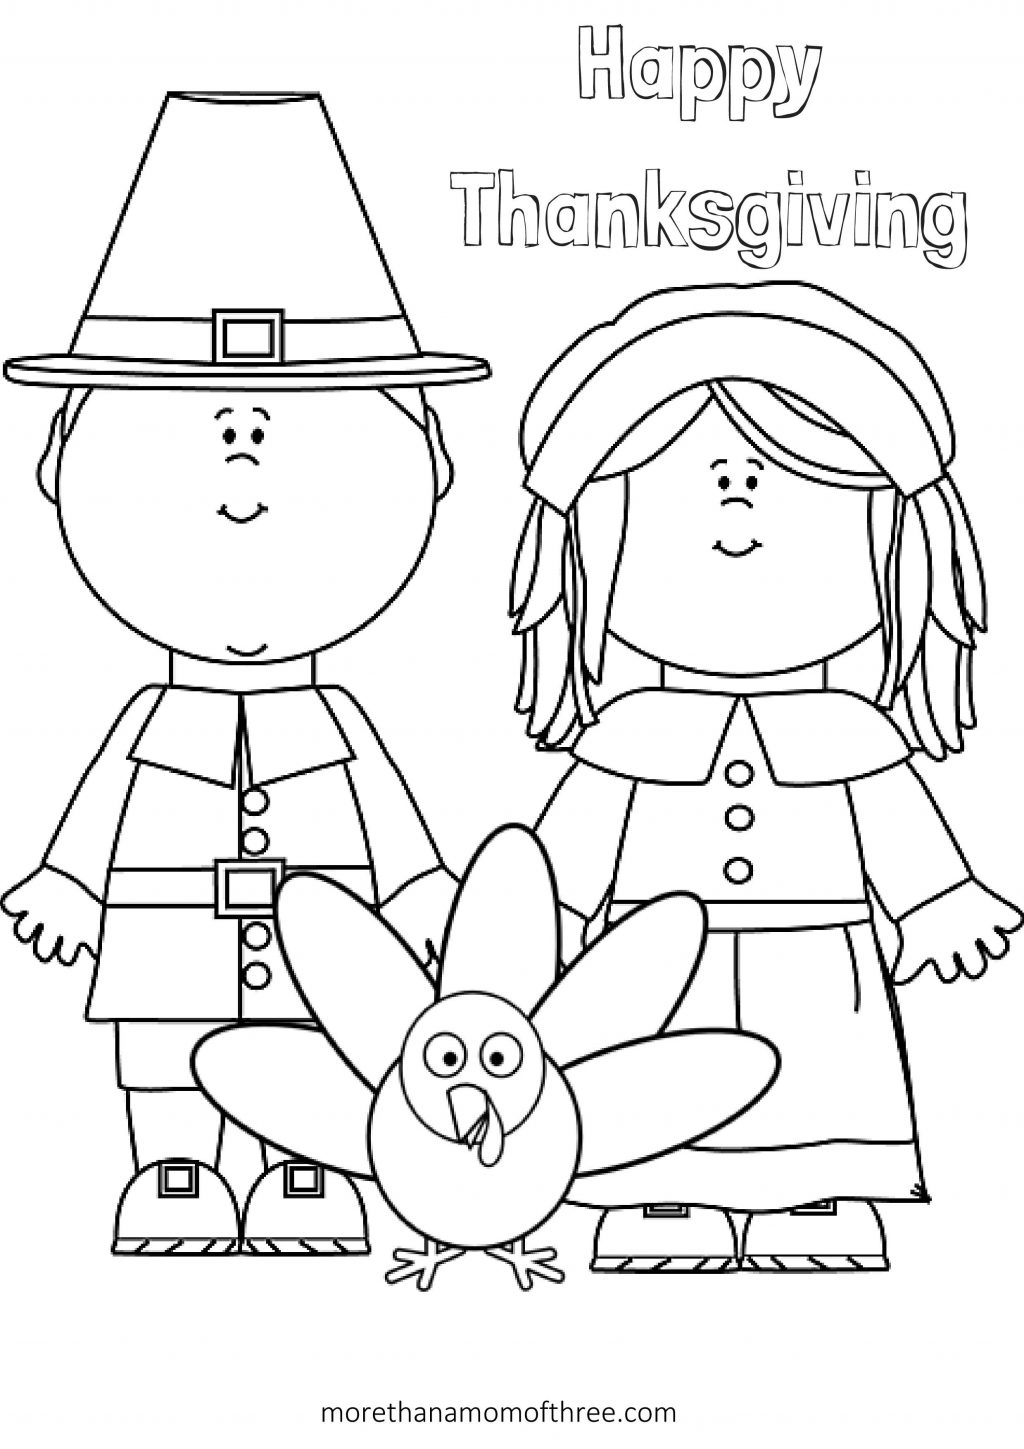 Octonauts Coloring Pages Printable Coloring Pages Happy Thanksgiving Coloring Pages Printable